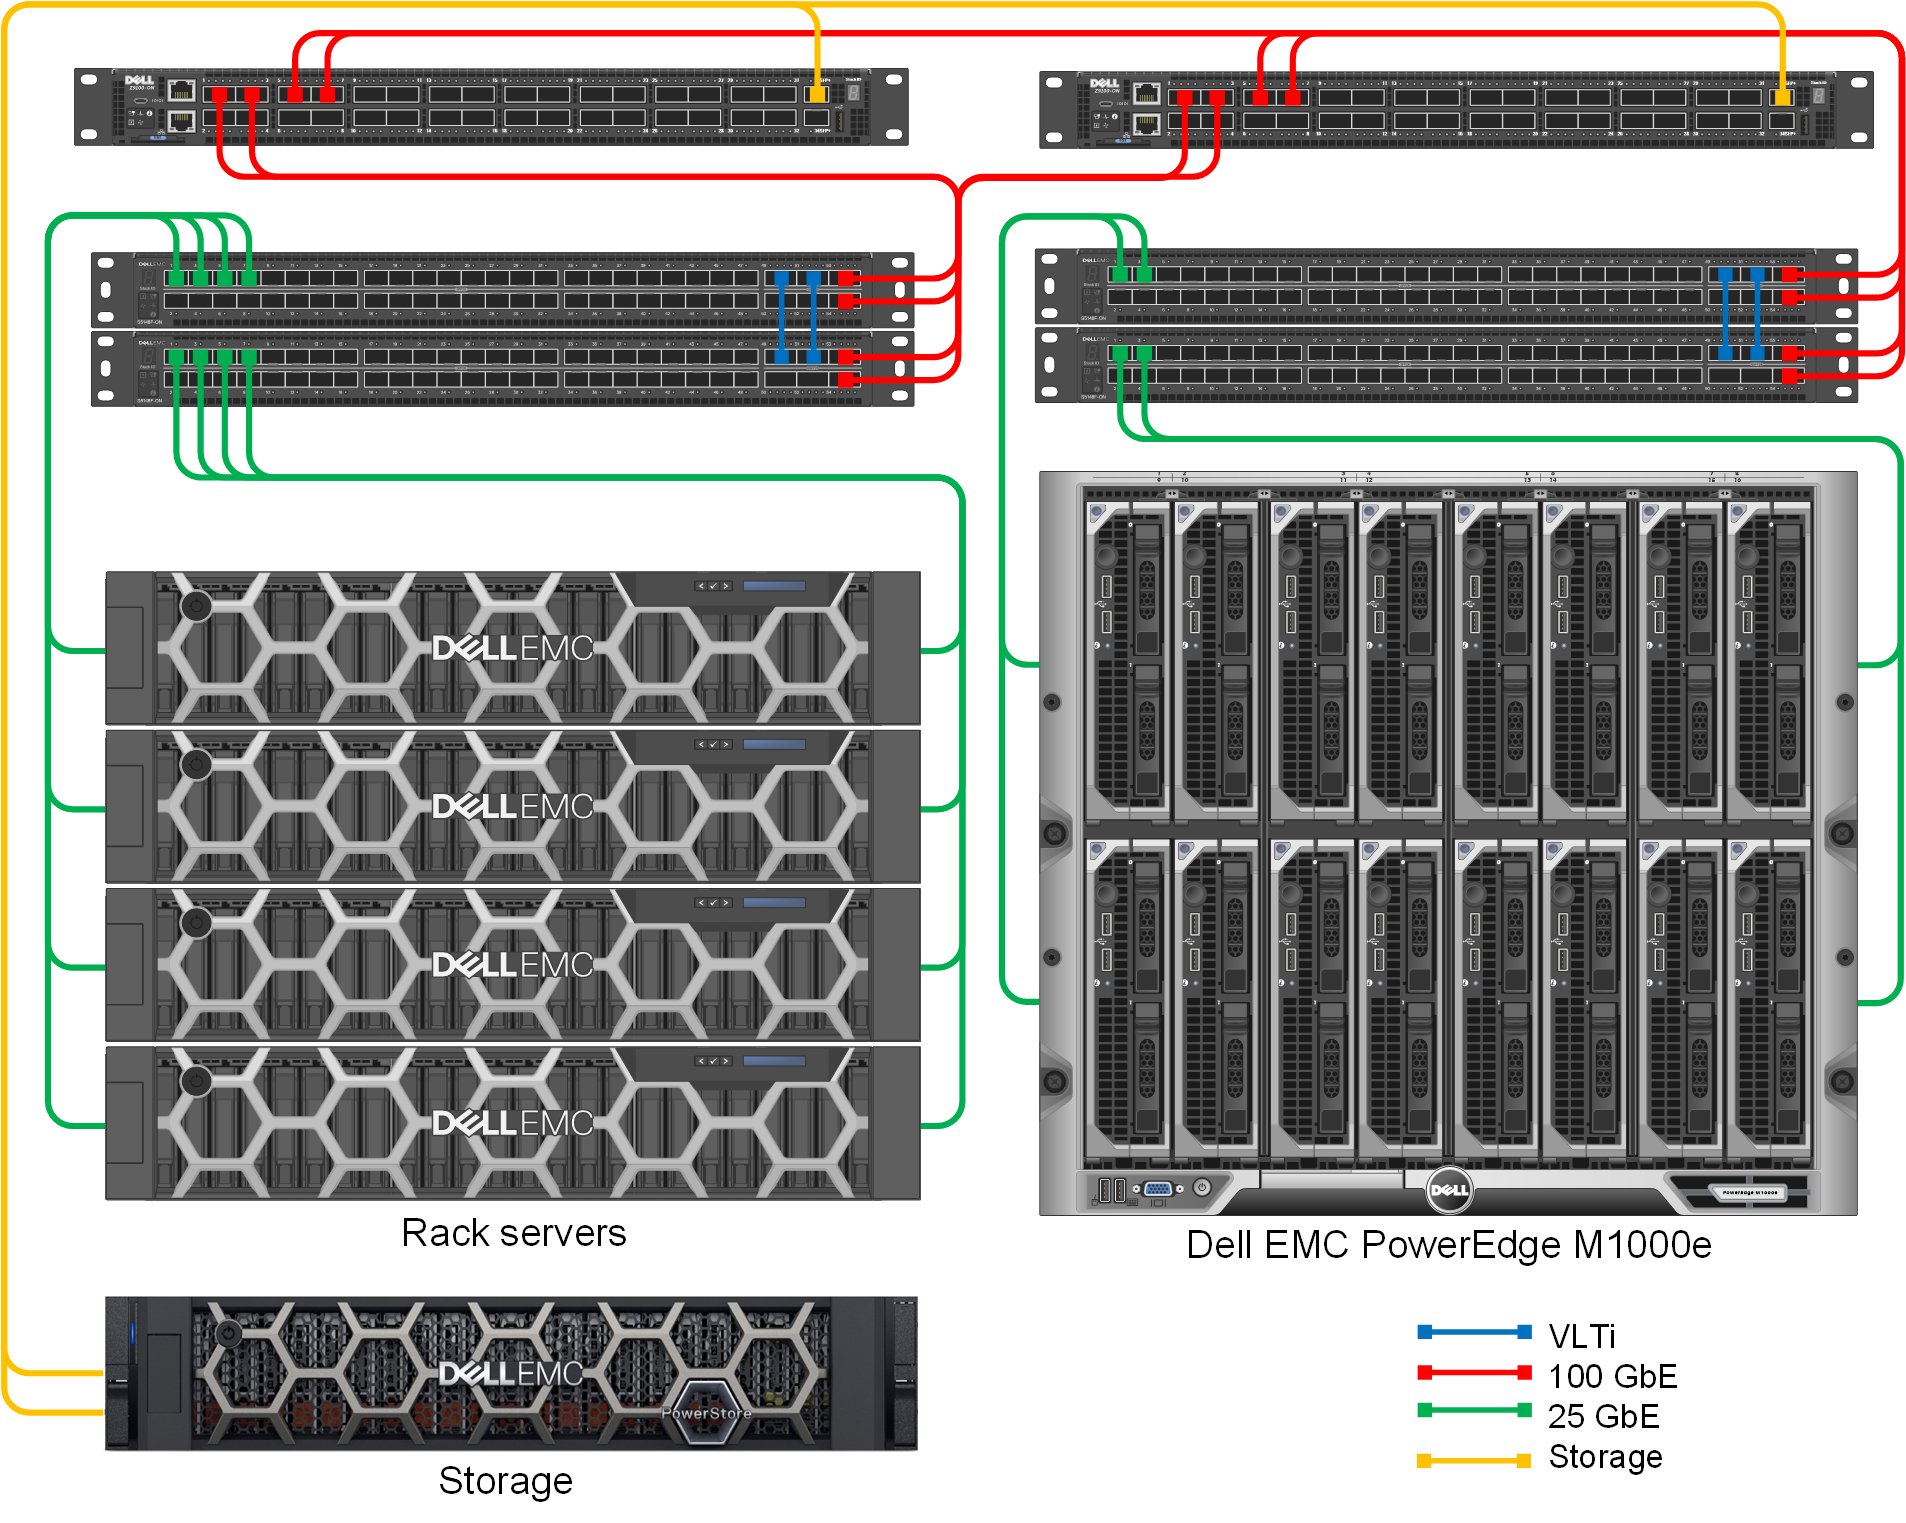 Traditional mixed blade/rack networking